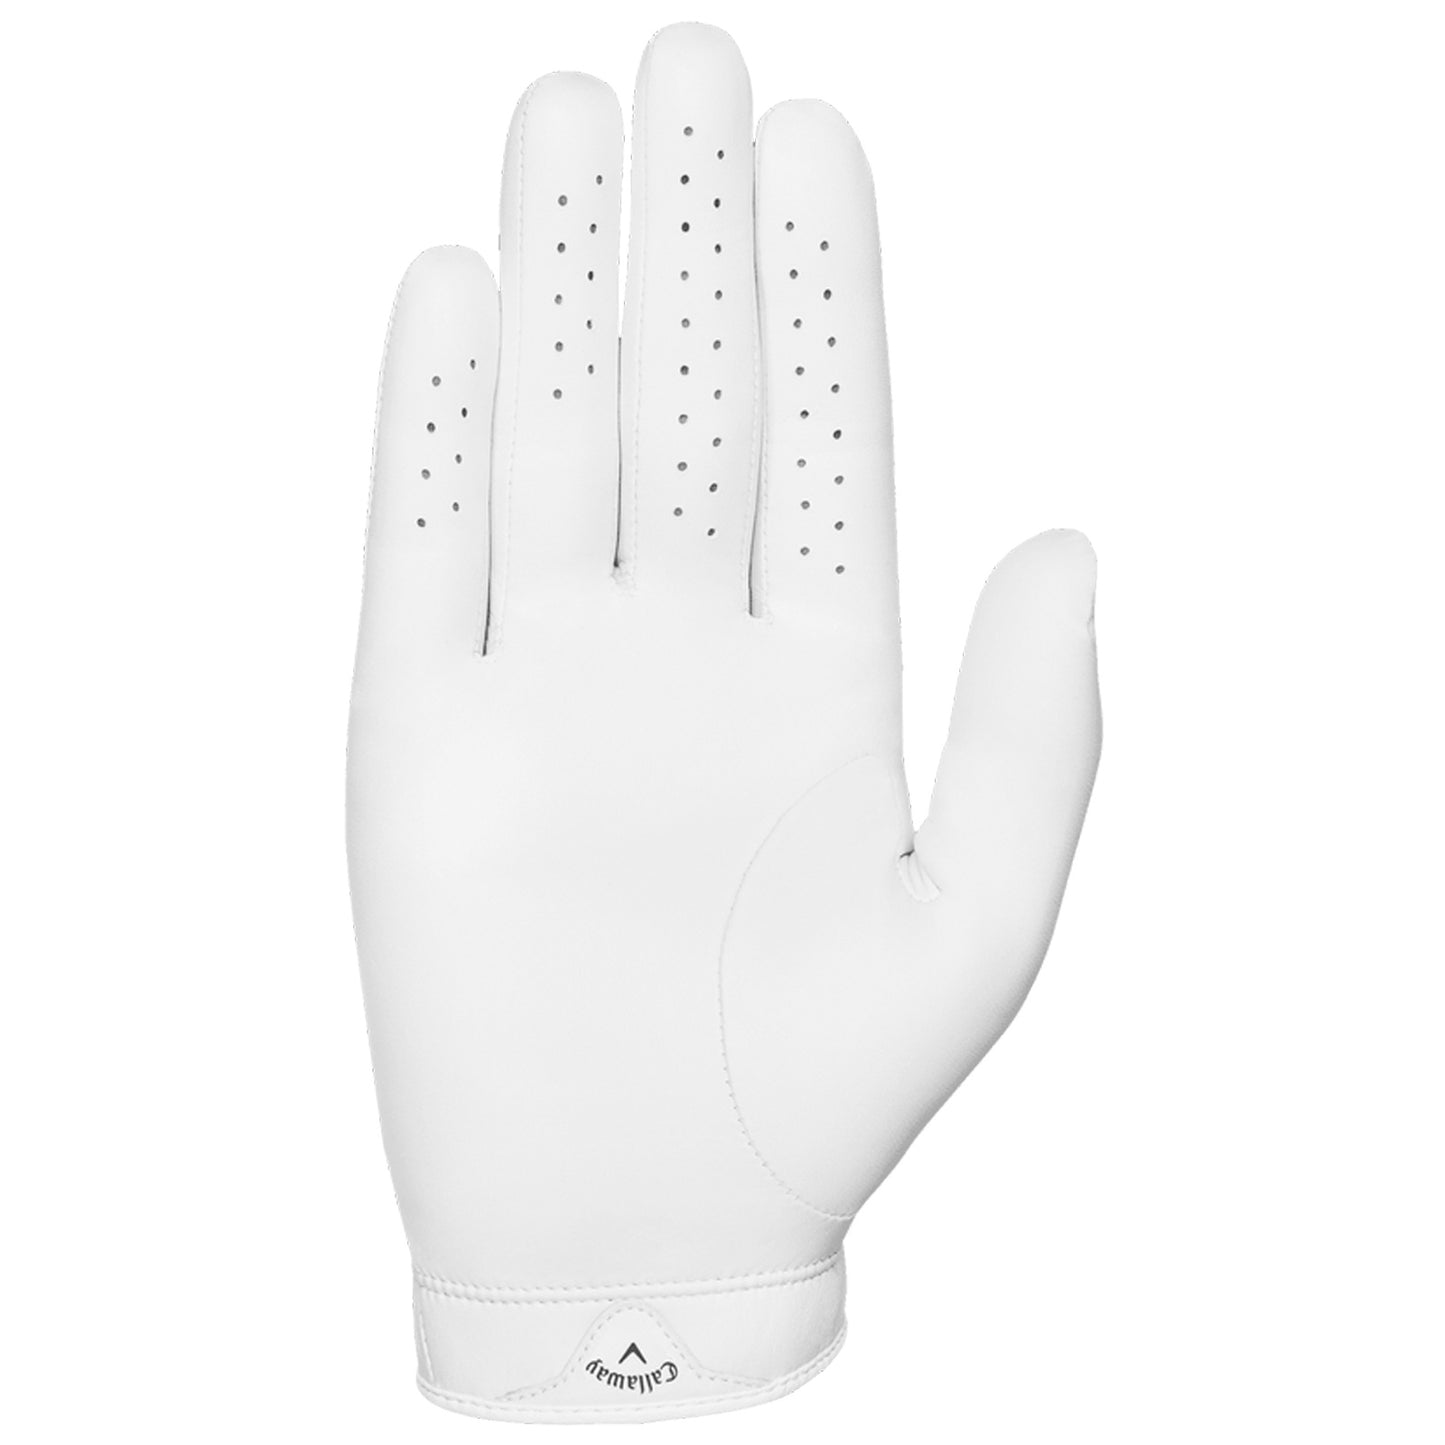 Callaway Mens Tour Authentic Right Hand Glove